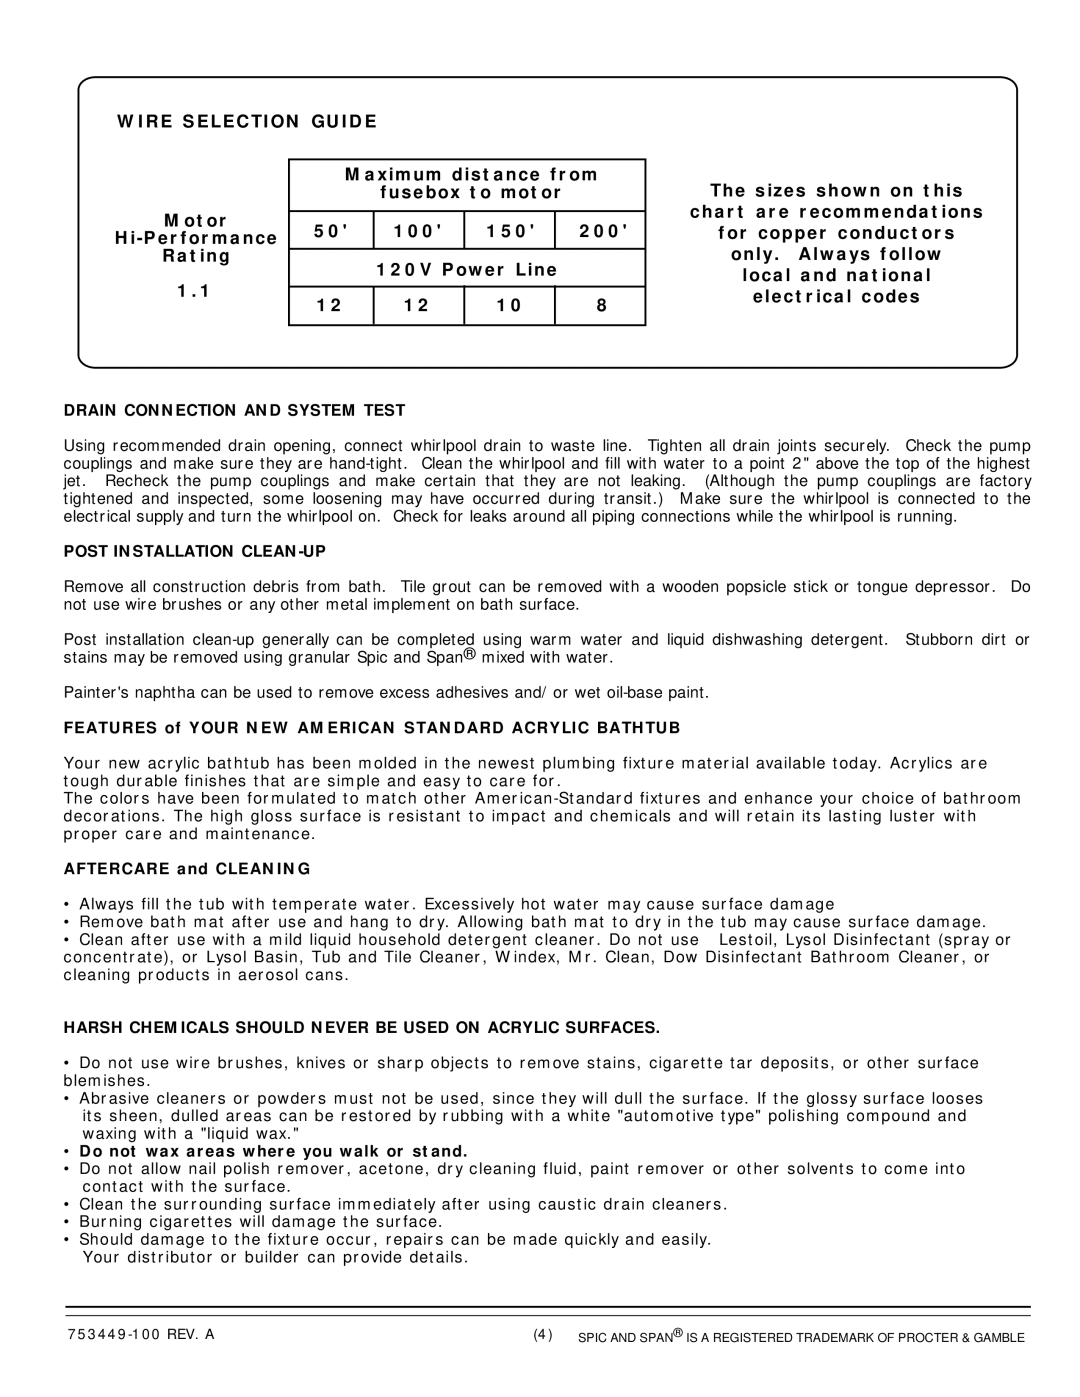 American Standard 1748 Wire Selection Guide, Maximum distance from, fusebox to motor, Motor, Hi-Performance, Rating 